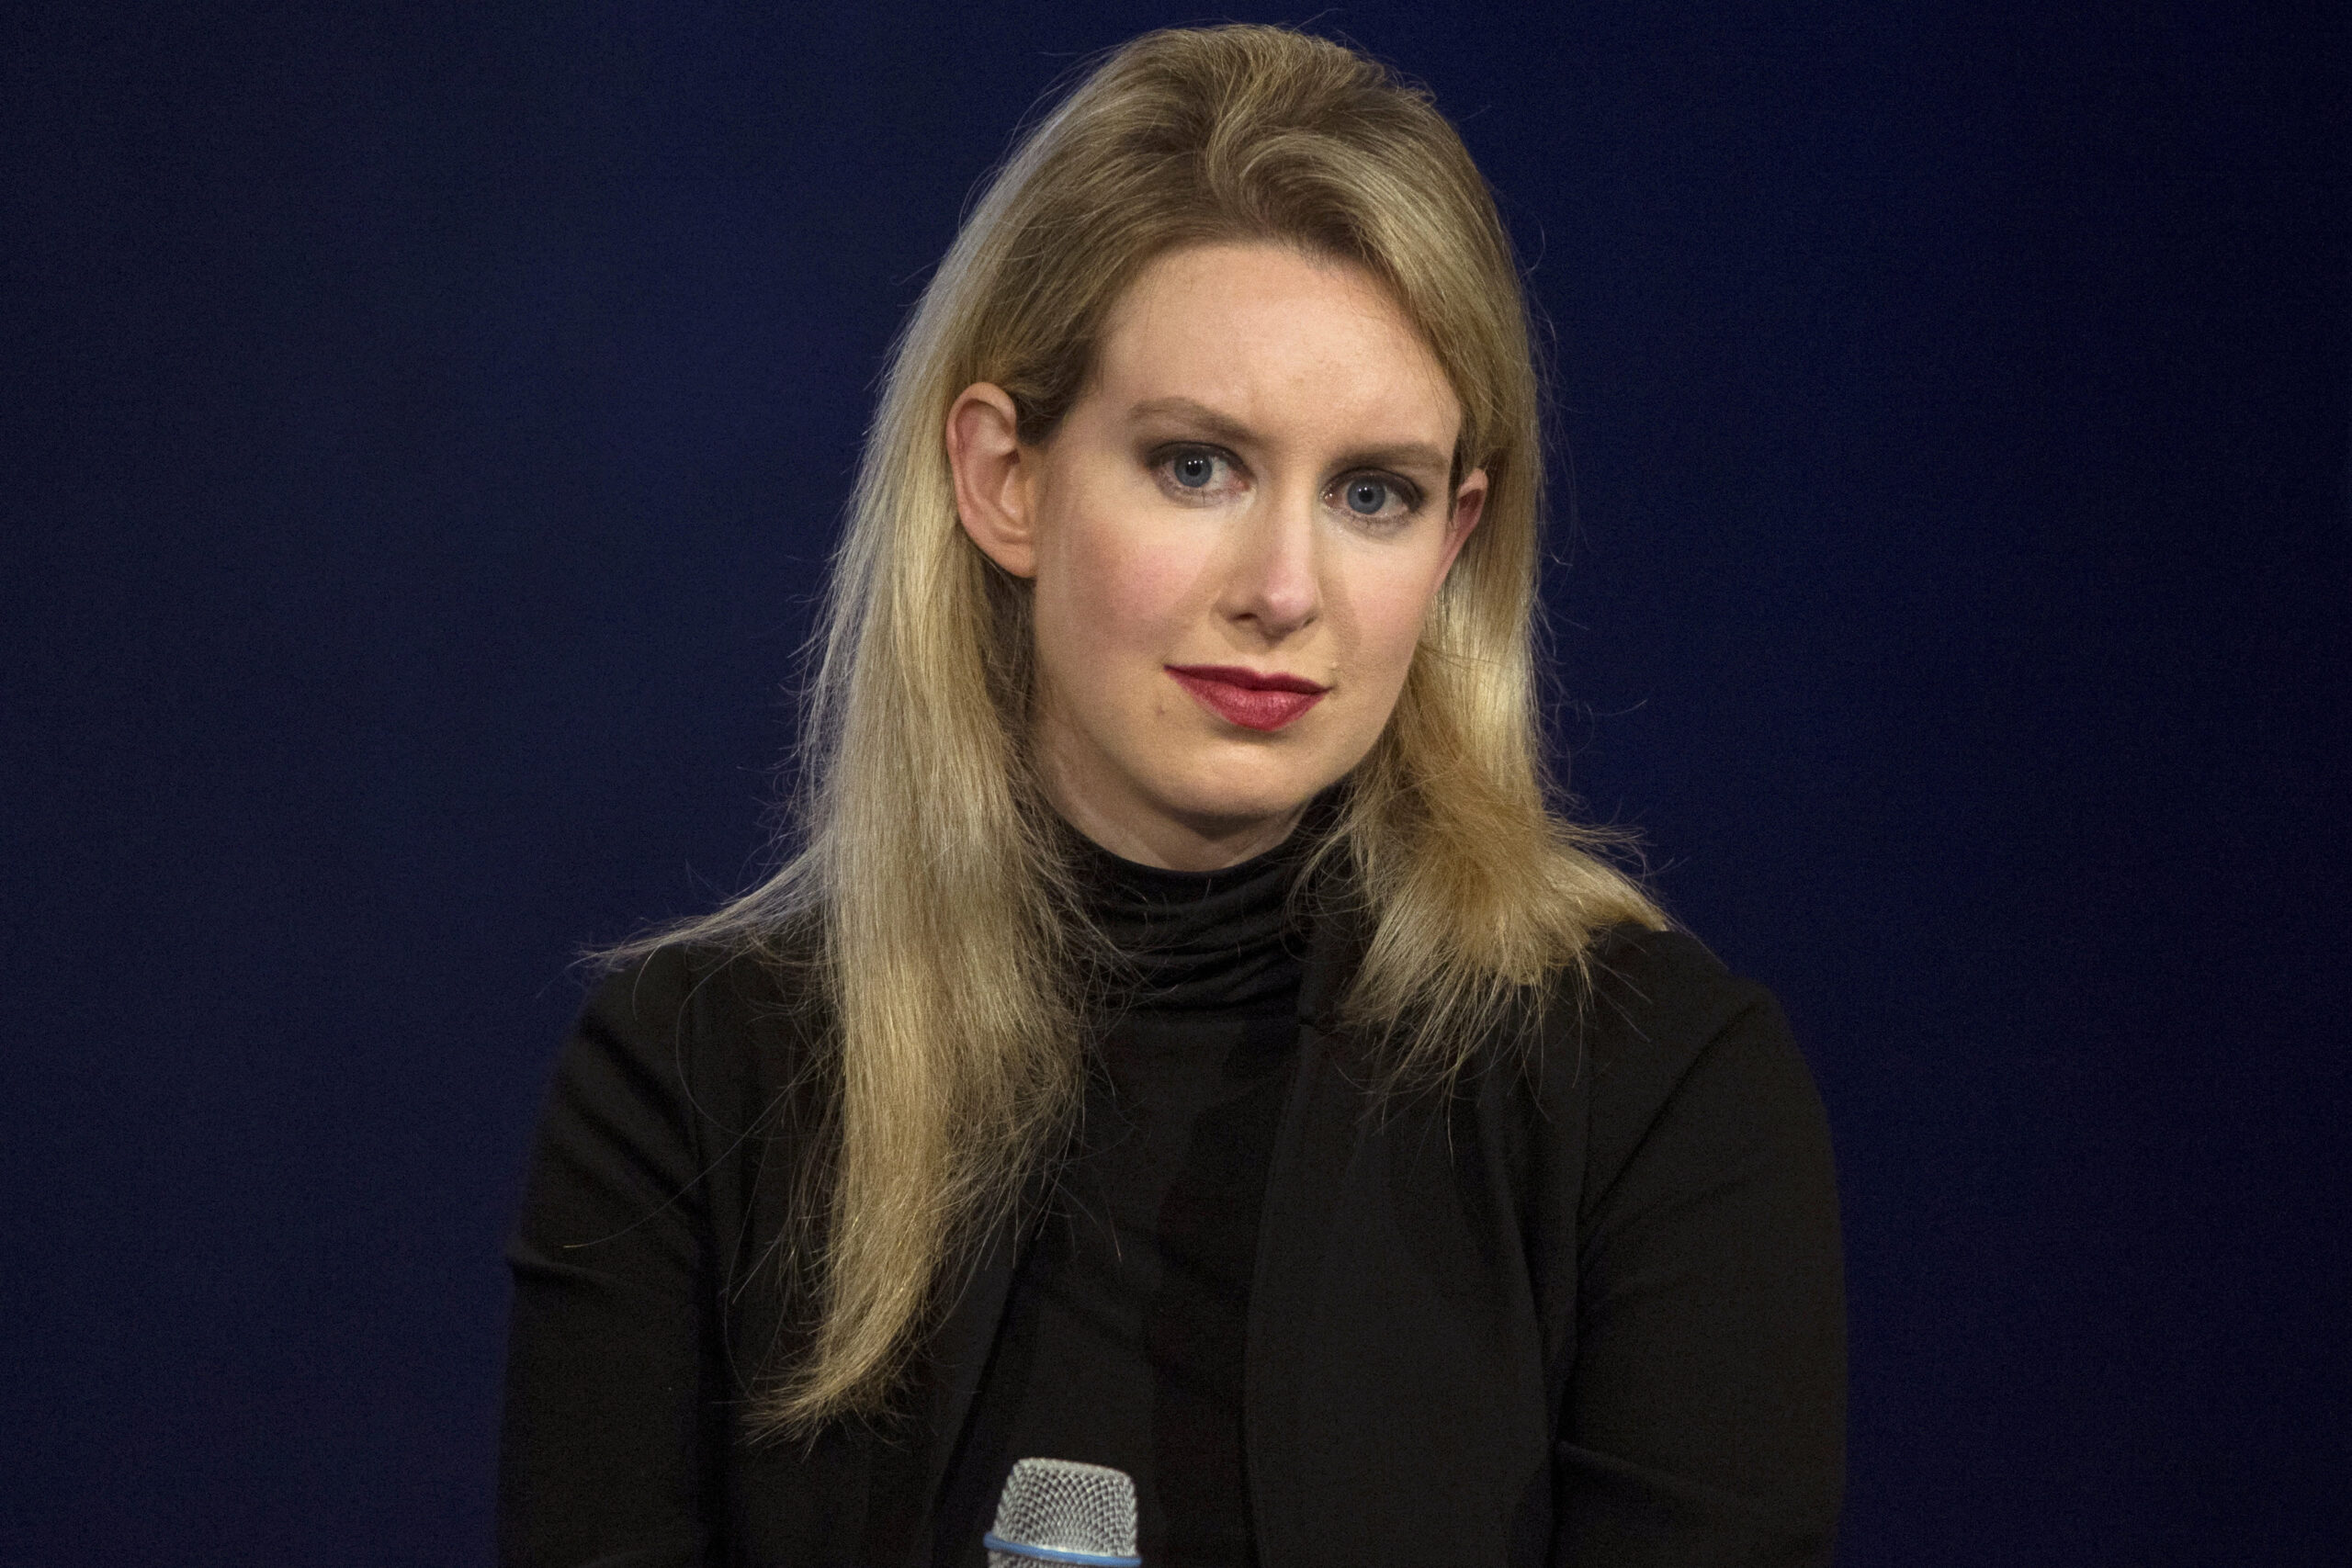 The lessons for investors from the trial of Theranos founder Elizabeth Holmes